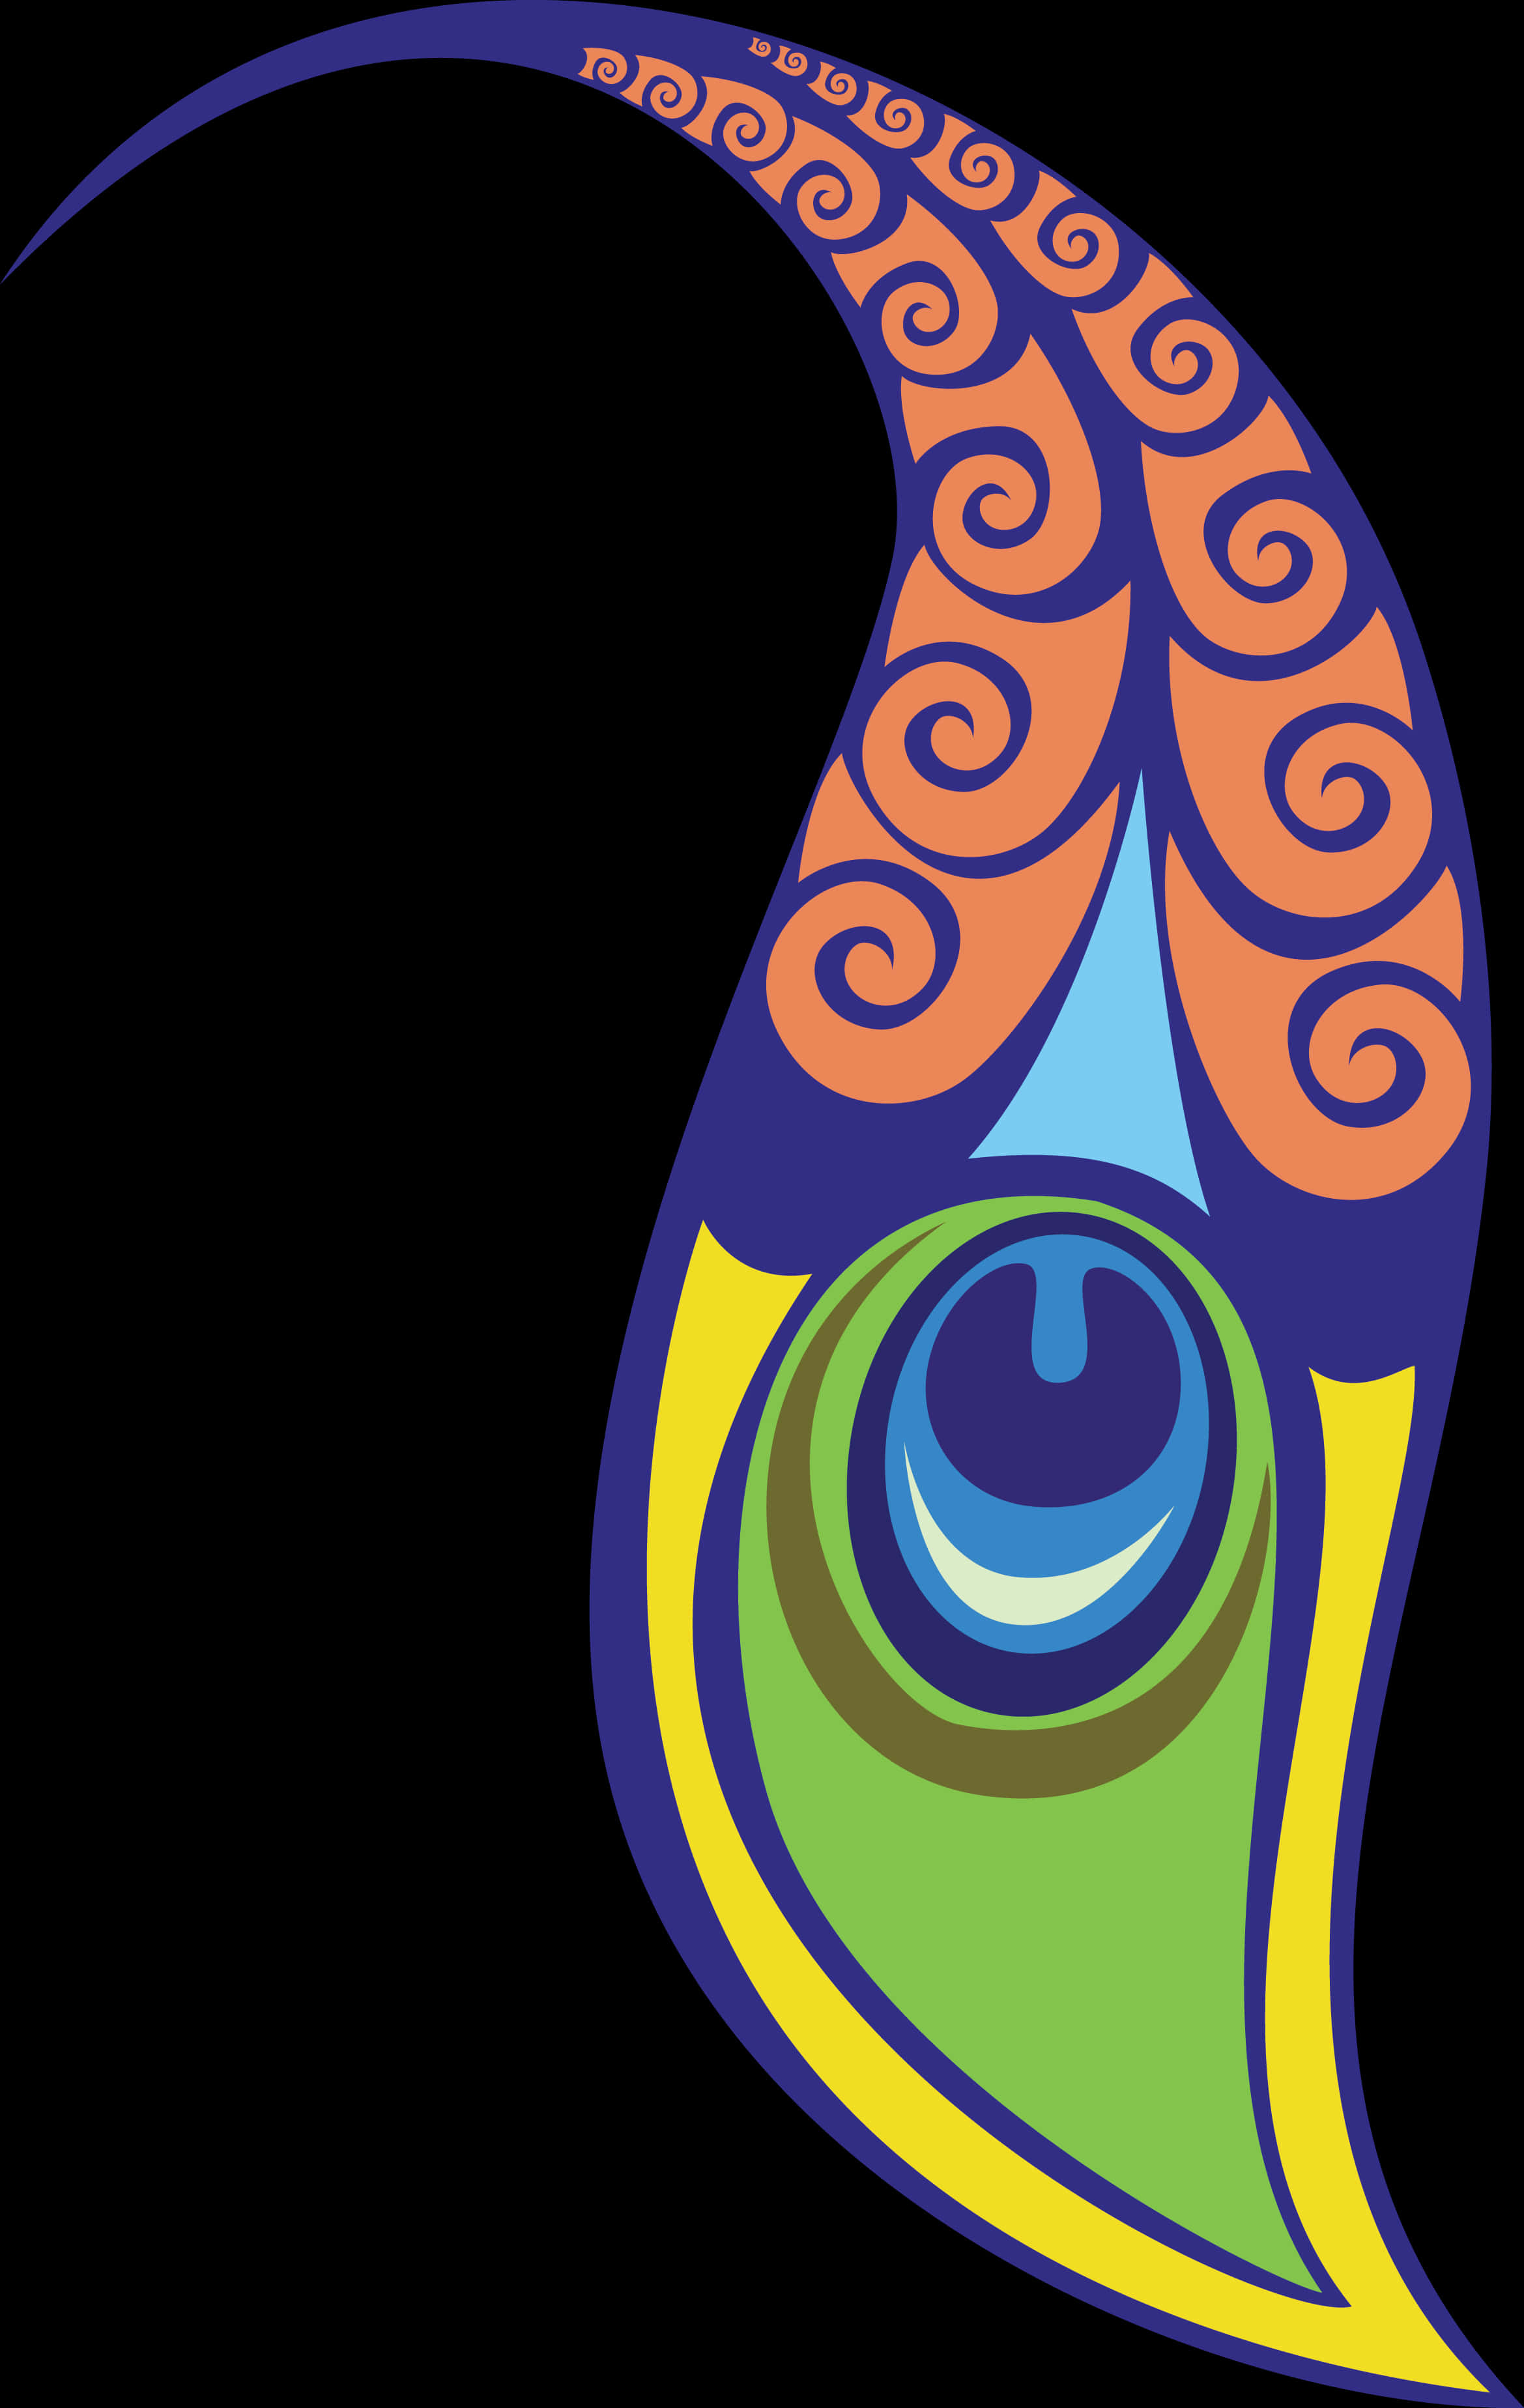 A Colorful Peacock With Swirls